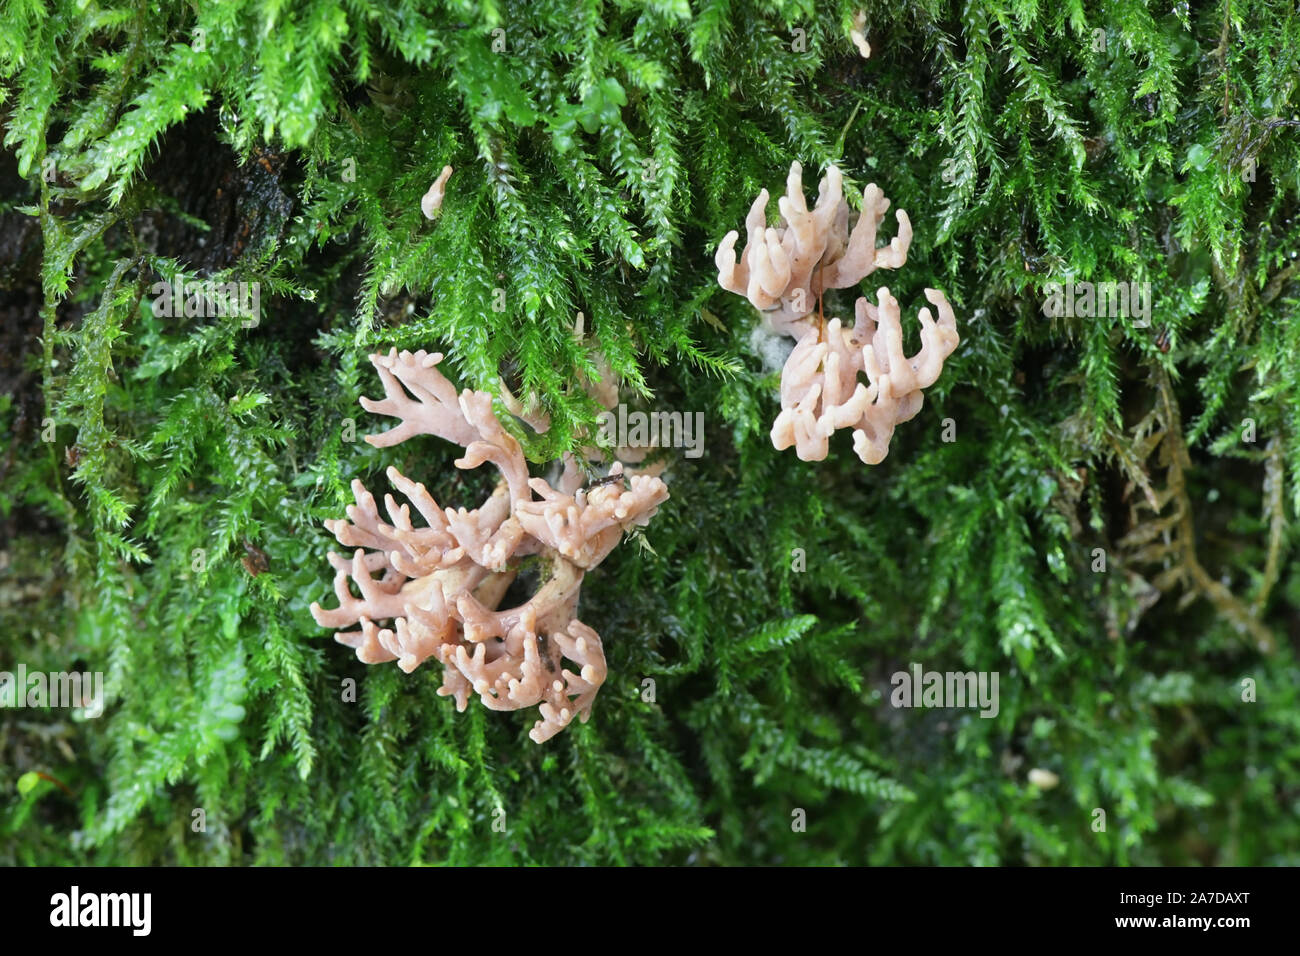 Lentaria byssiseda, coral fungus from Finland Stock Photo